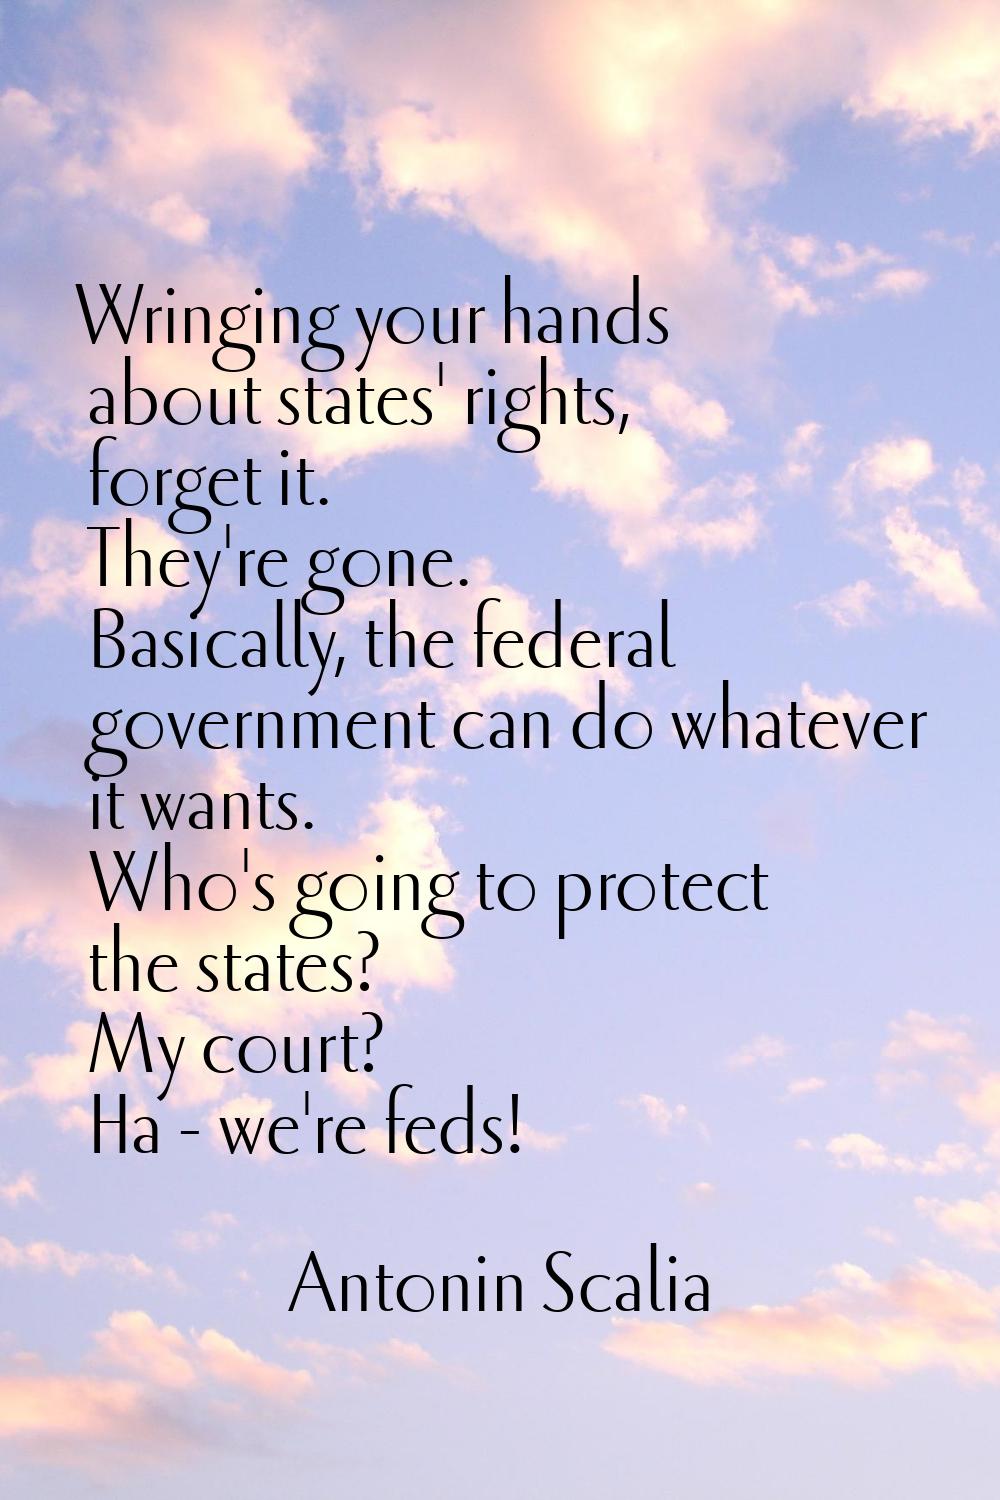 Wringing your hands about states' rights, forget it. They're gone. Basically, the federal governmen